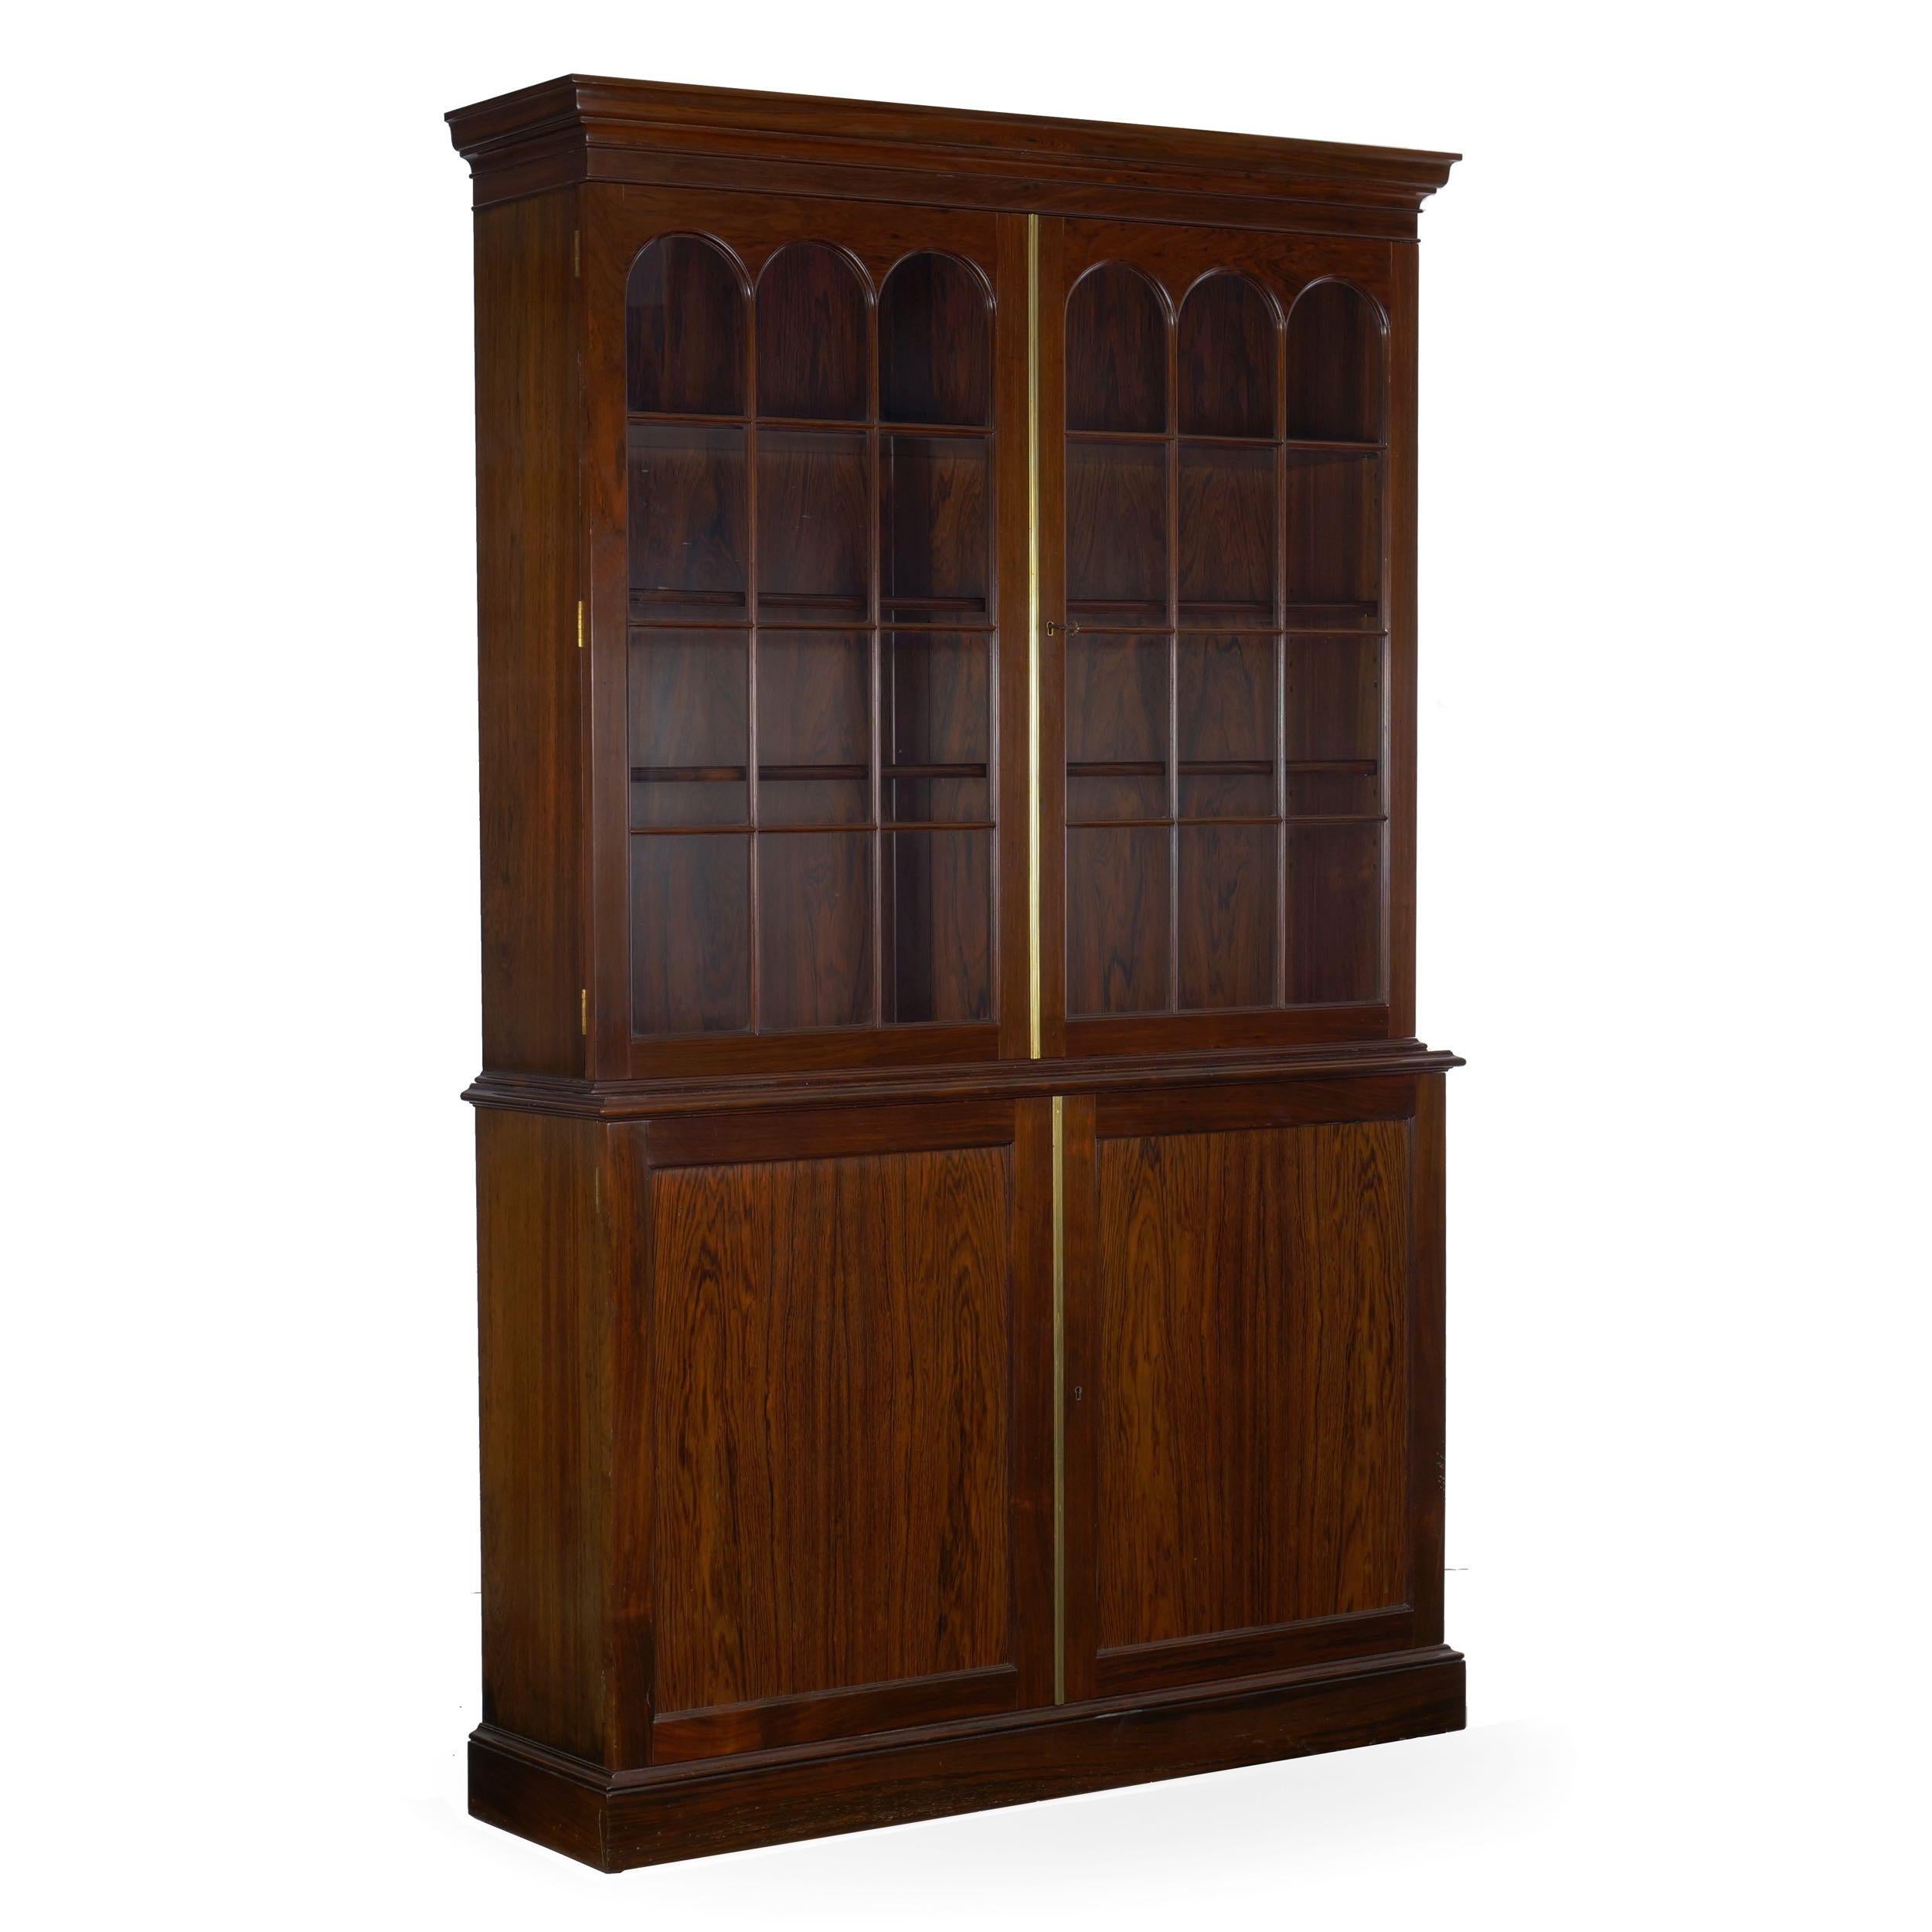 A very fine reproduction of the George III taste using rich and exotic rosewood veneers and solids to create a dramatic display, 20th century the cabinet is exquisite in quality and material, the rich and dense rosewood polished to a near